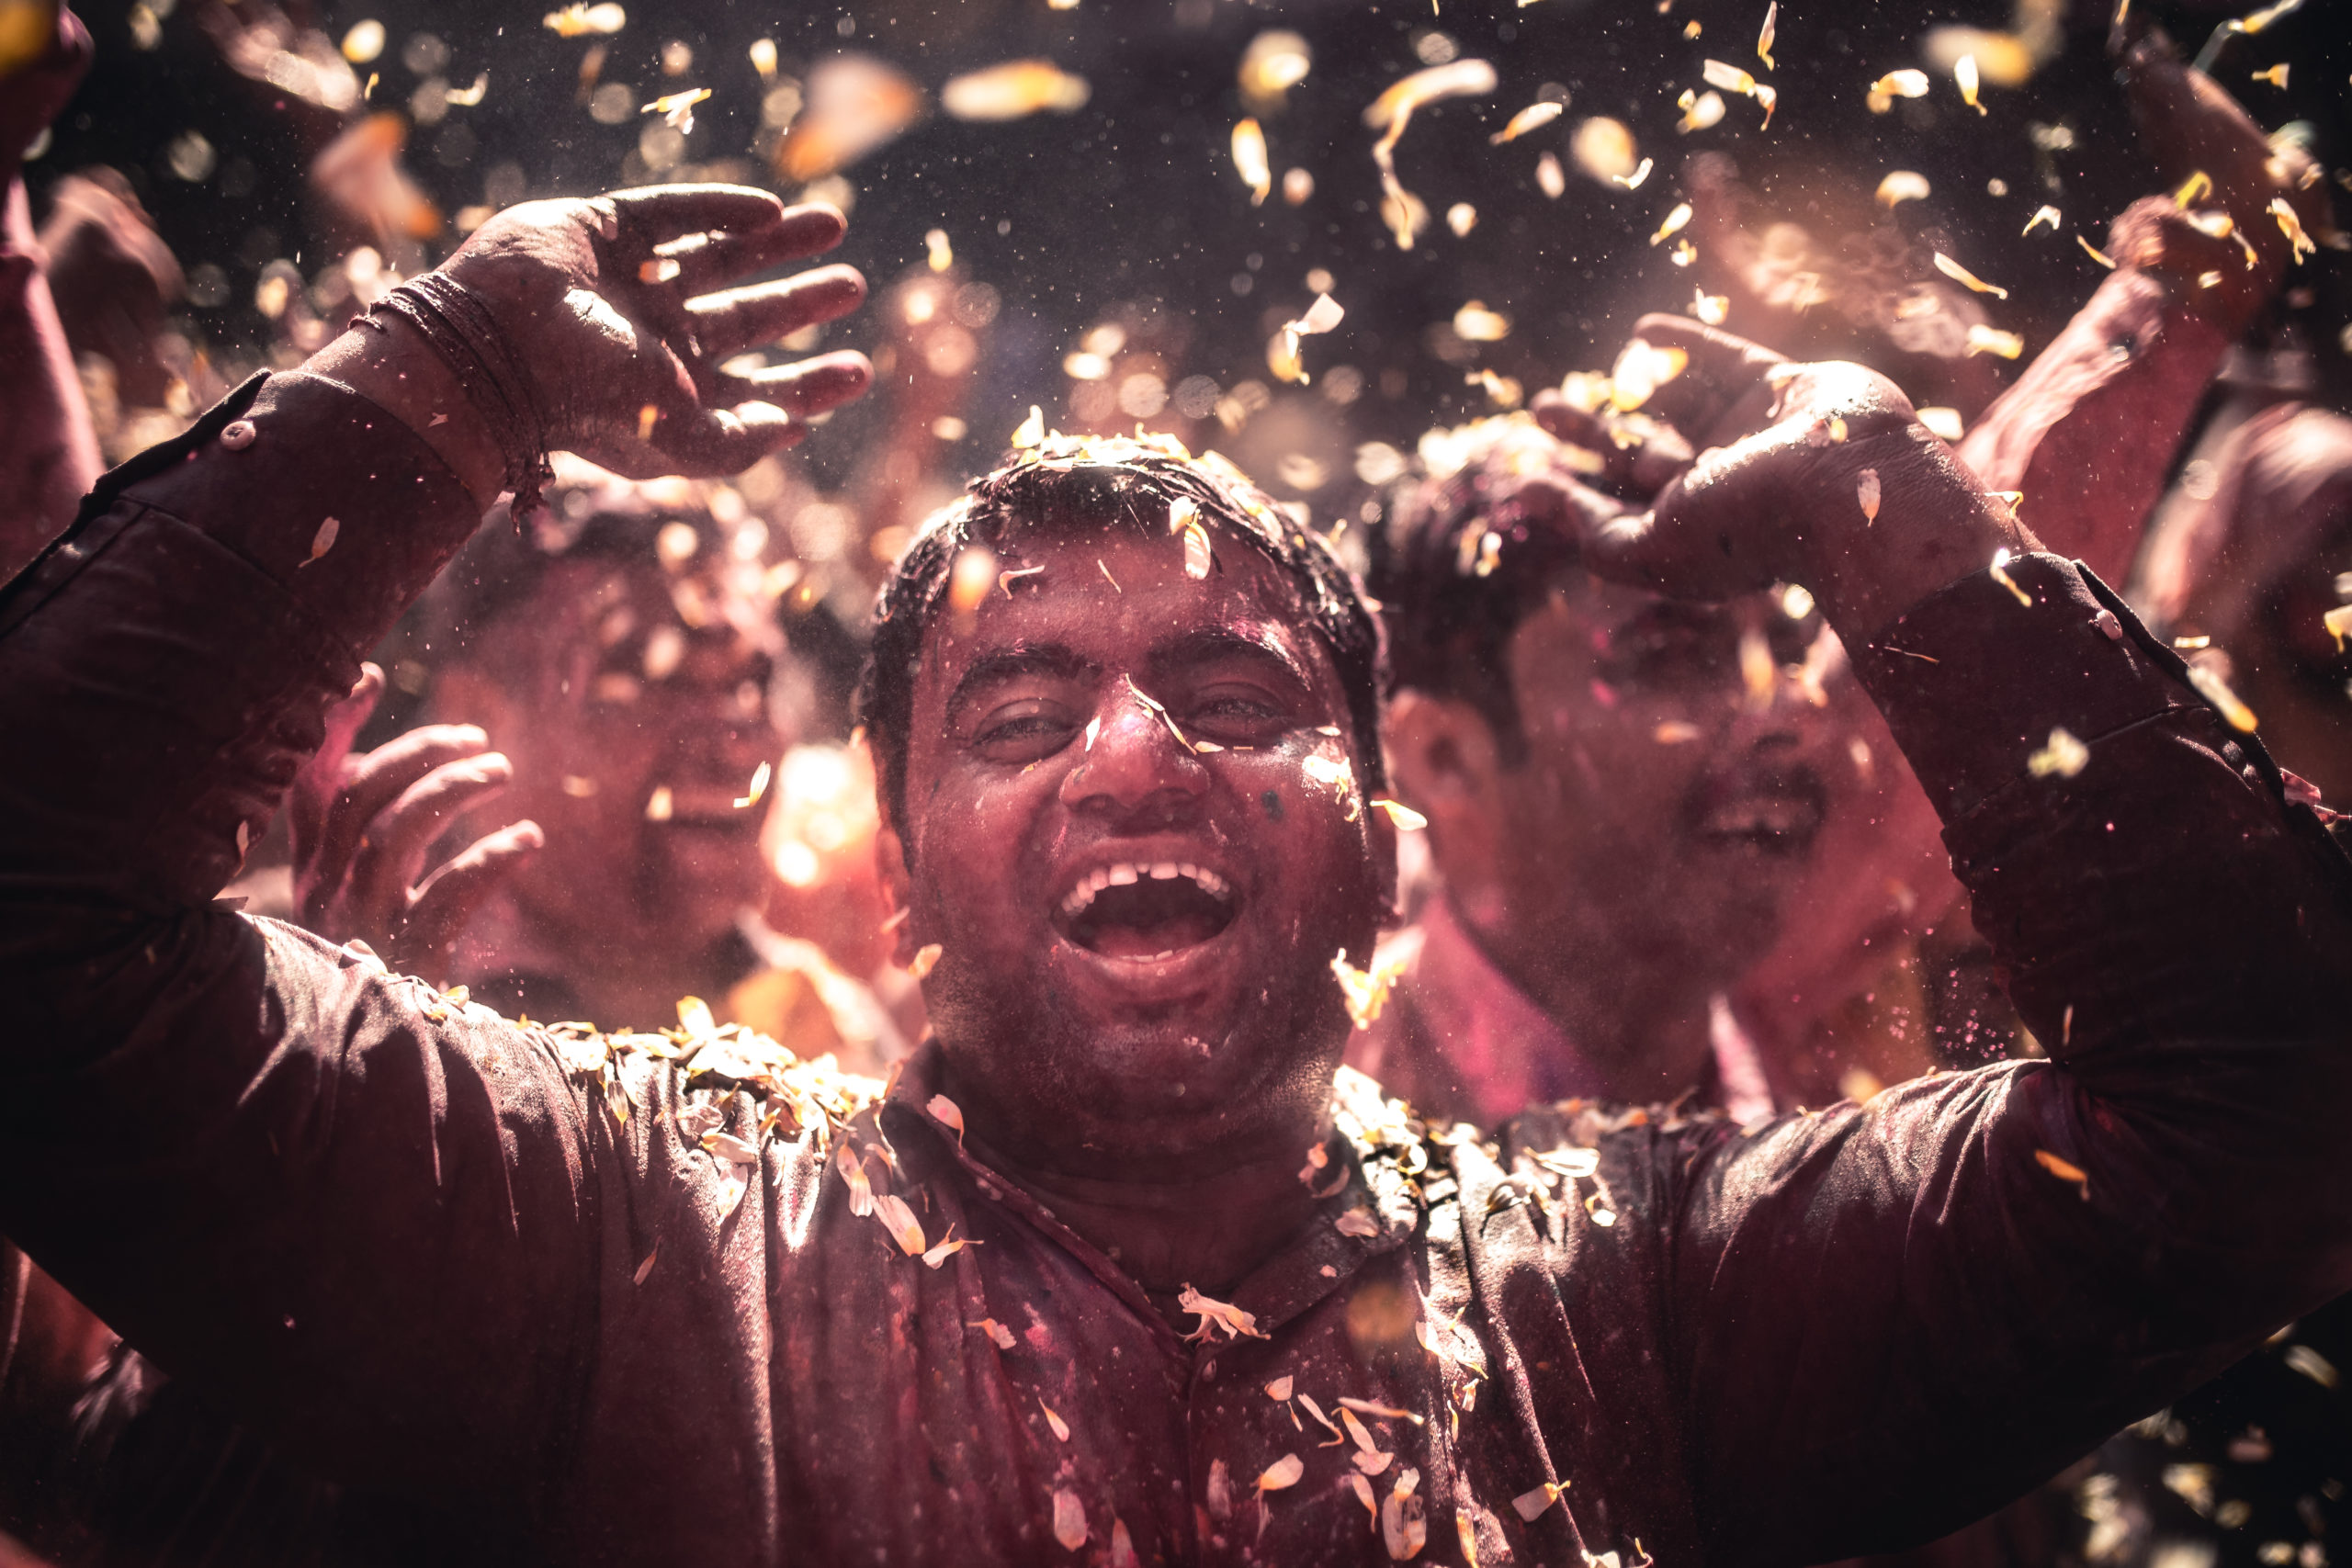 Street photography of a joyful man celebrating the Holi Festival in Vrindivan, India as flower pedals fall from above